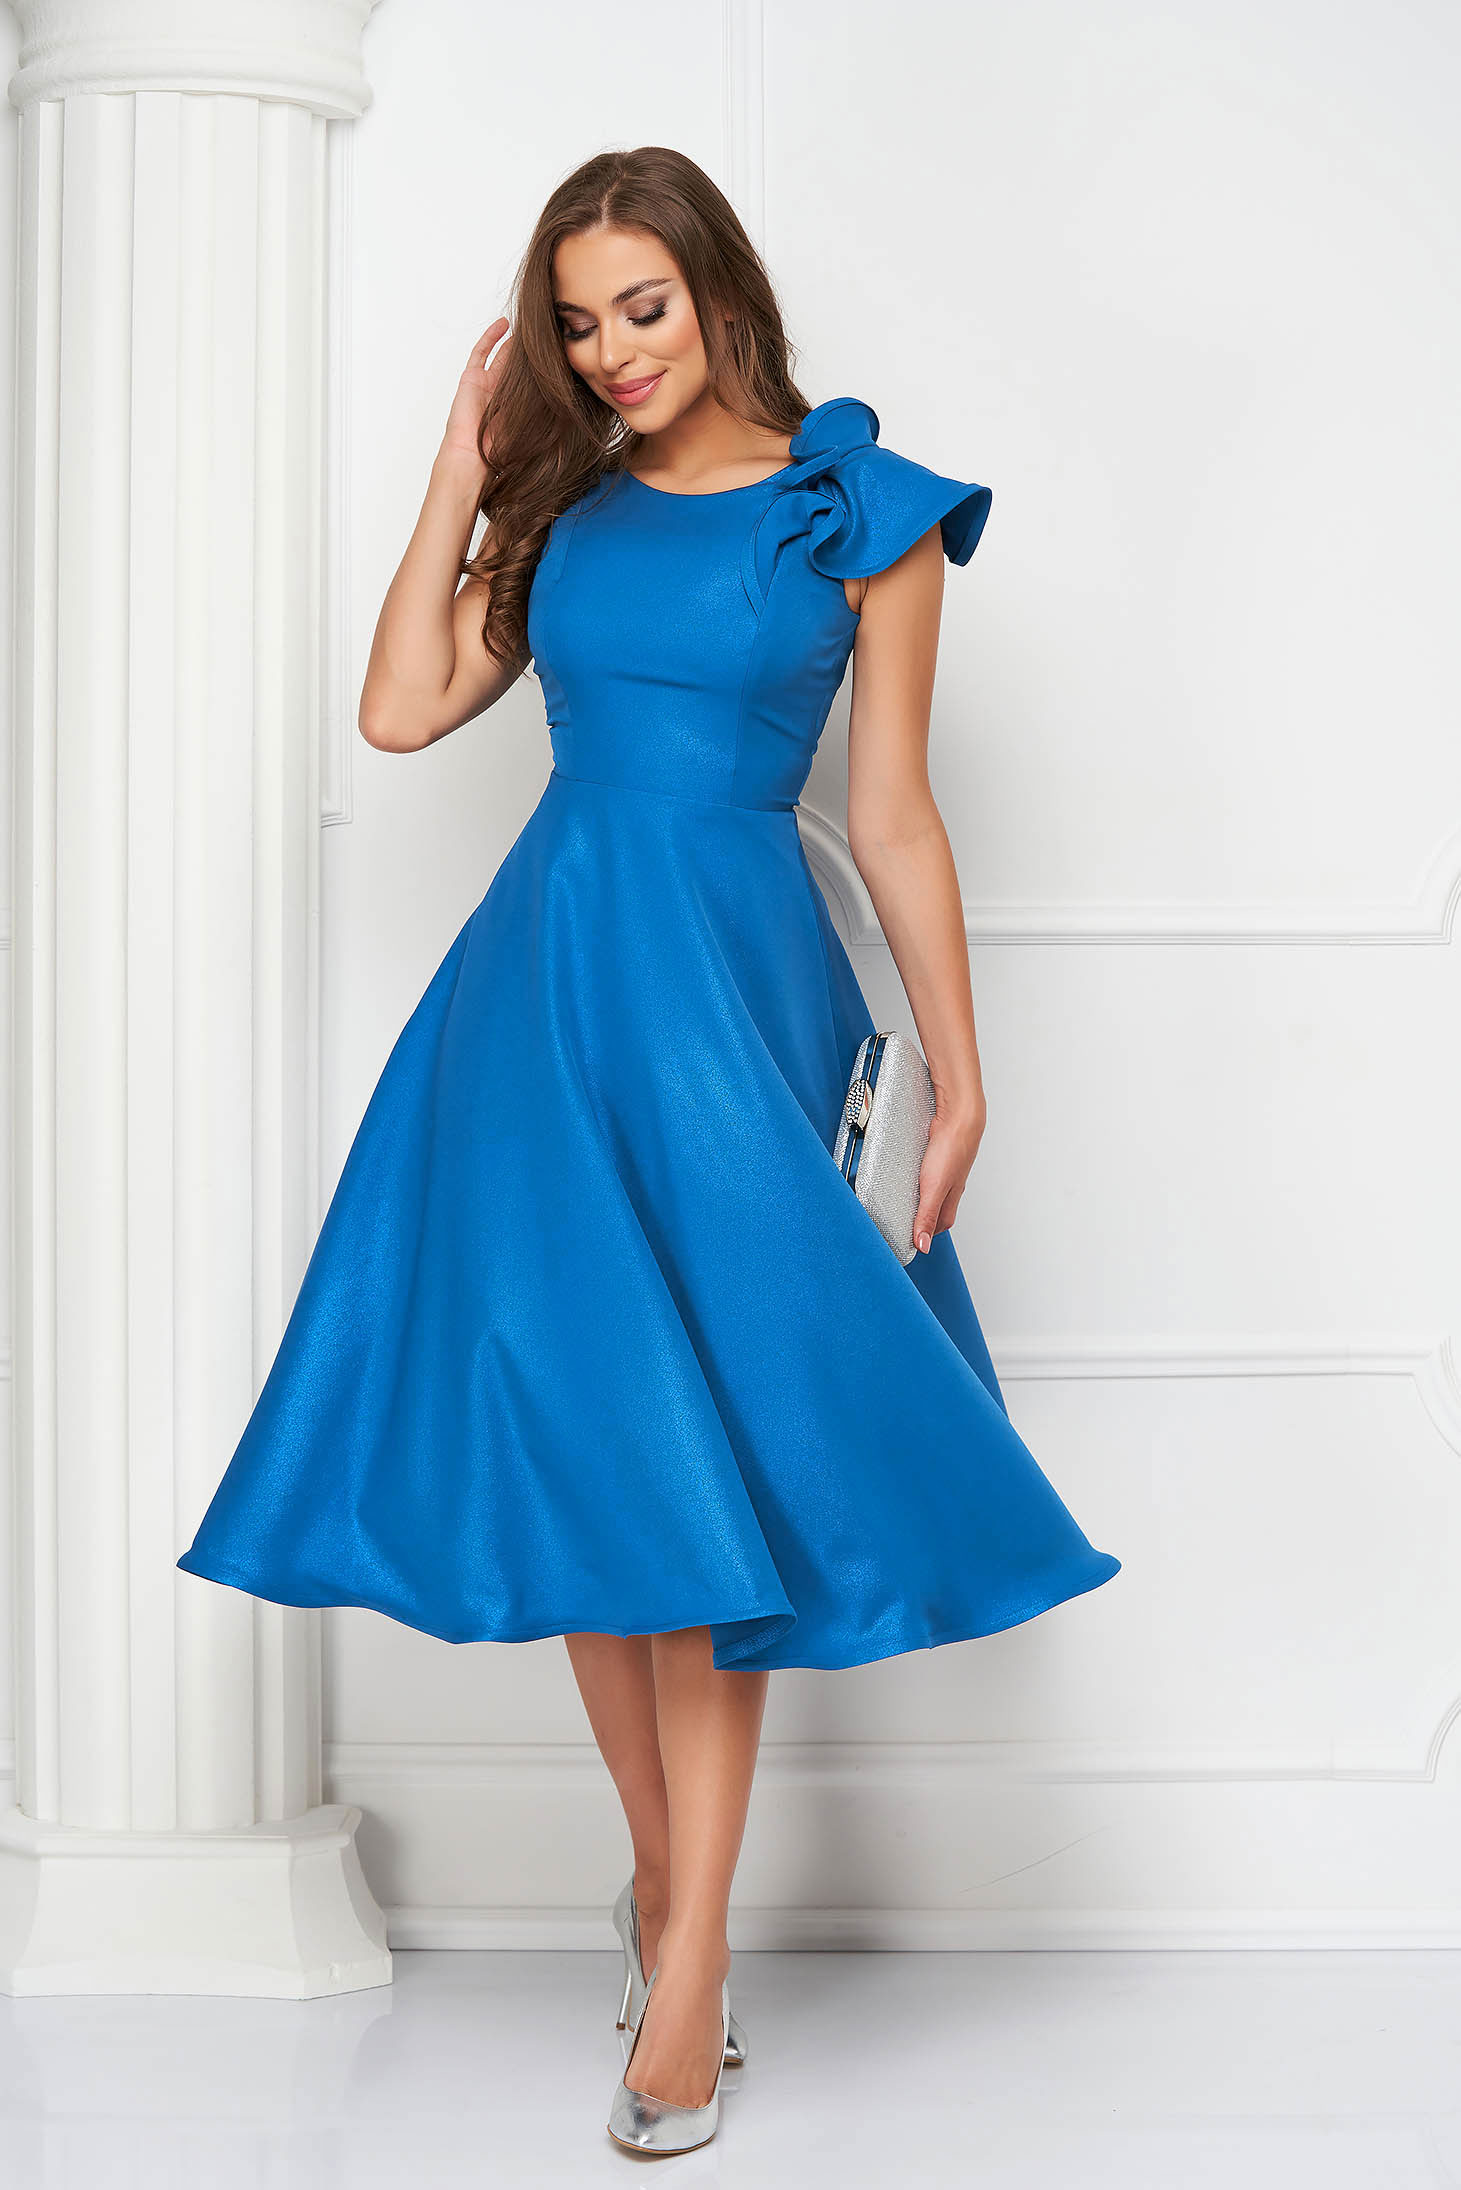 Blue Elastic Fabric Dress with Ruffles on the Shoulder - StarShinerS 4 - StarShinerS.com